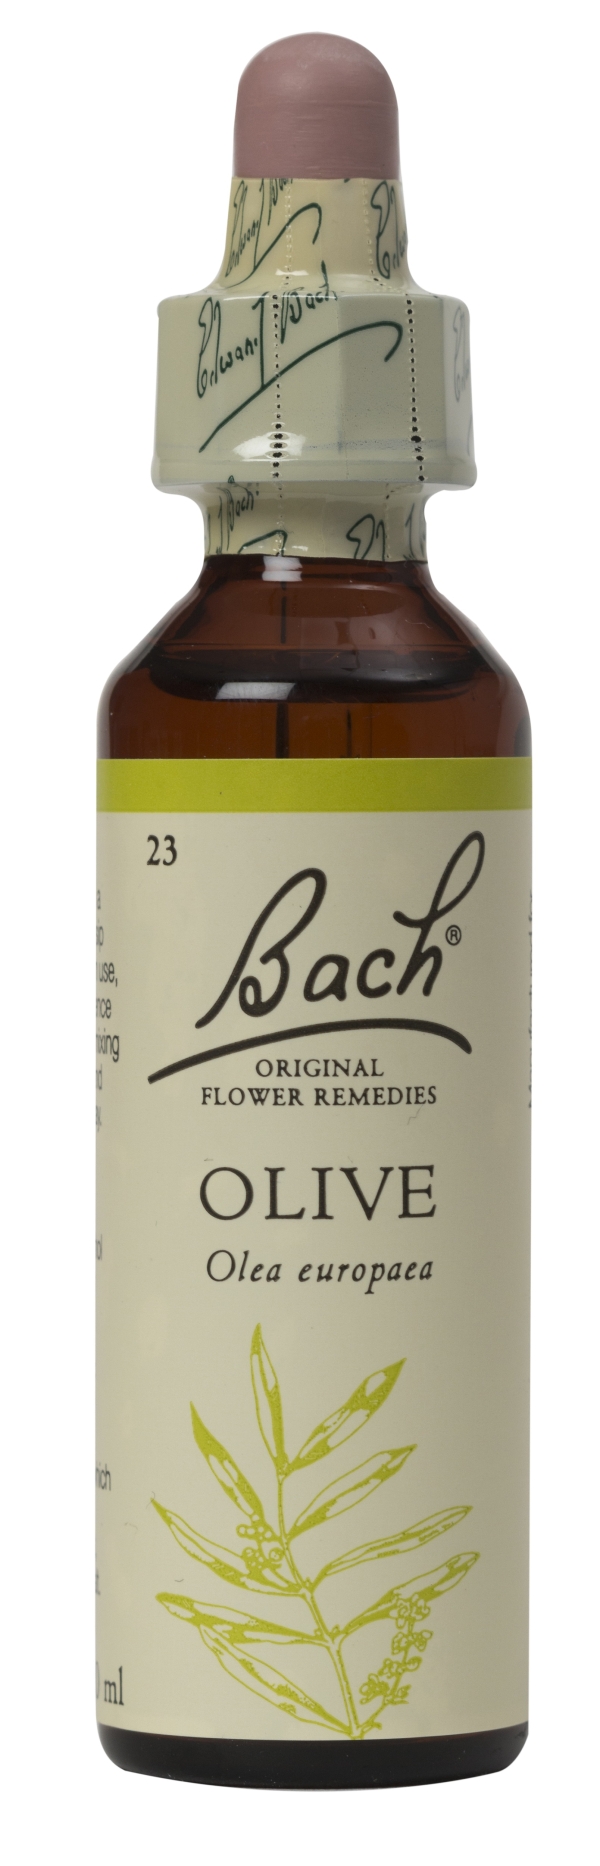 Nelson Bach Flower Remedies: Bach Olive Flower Remedy (20ml) available online here